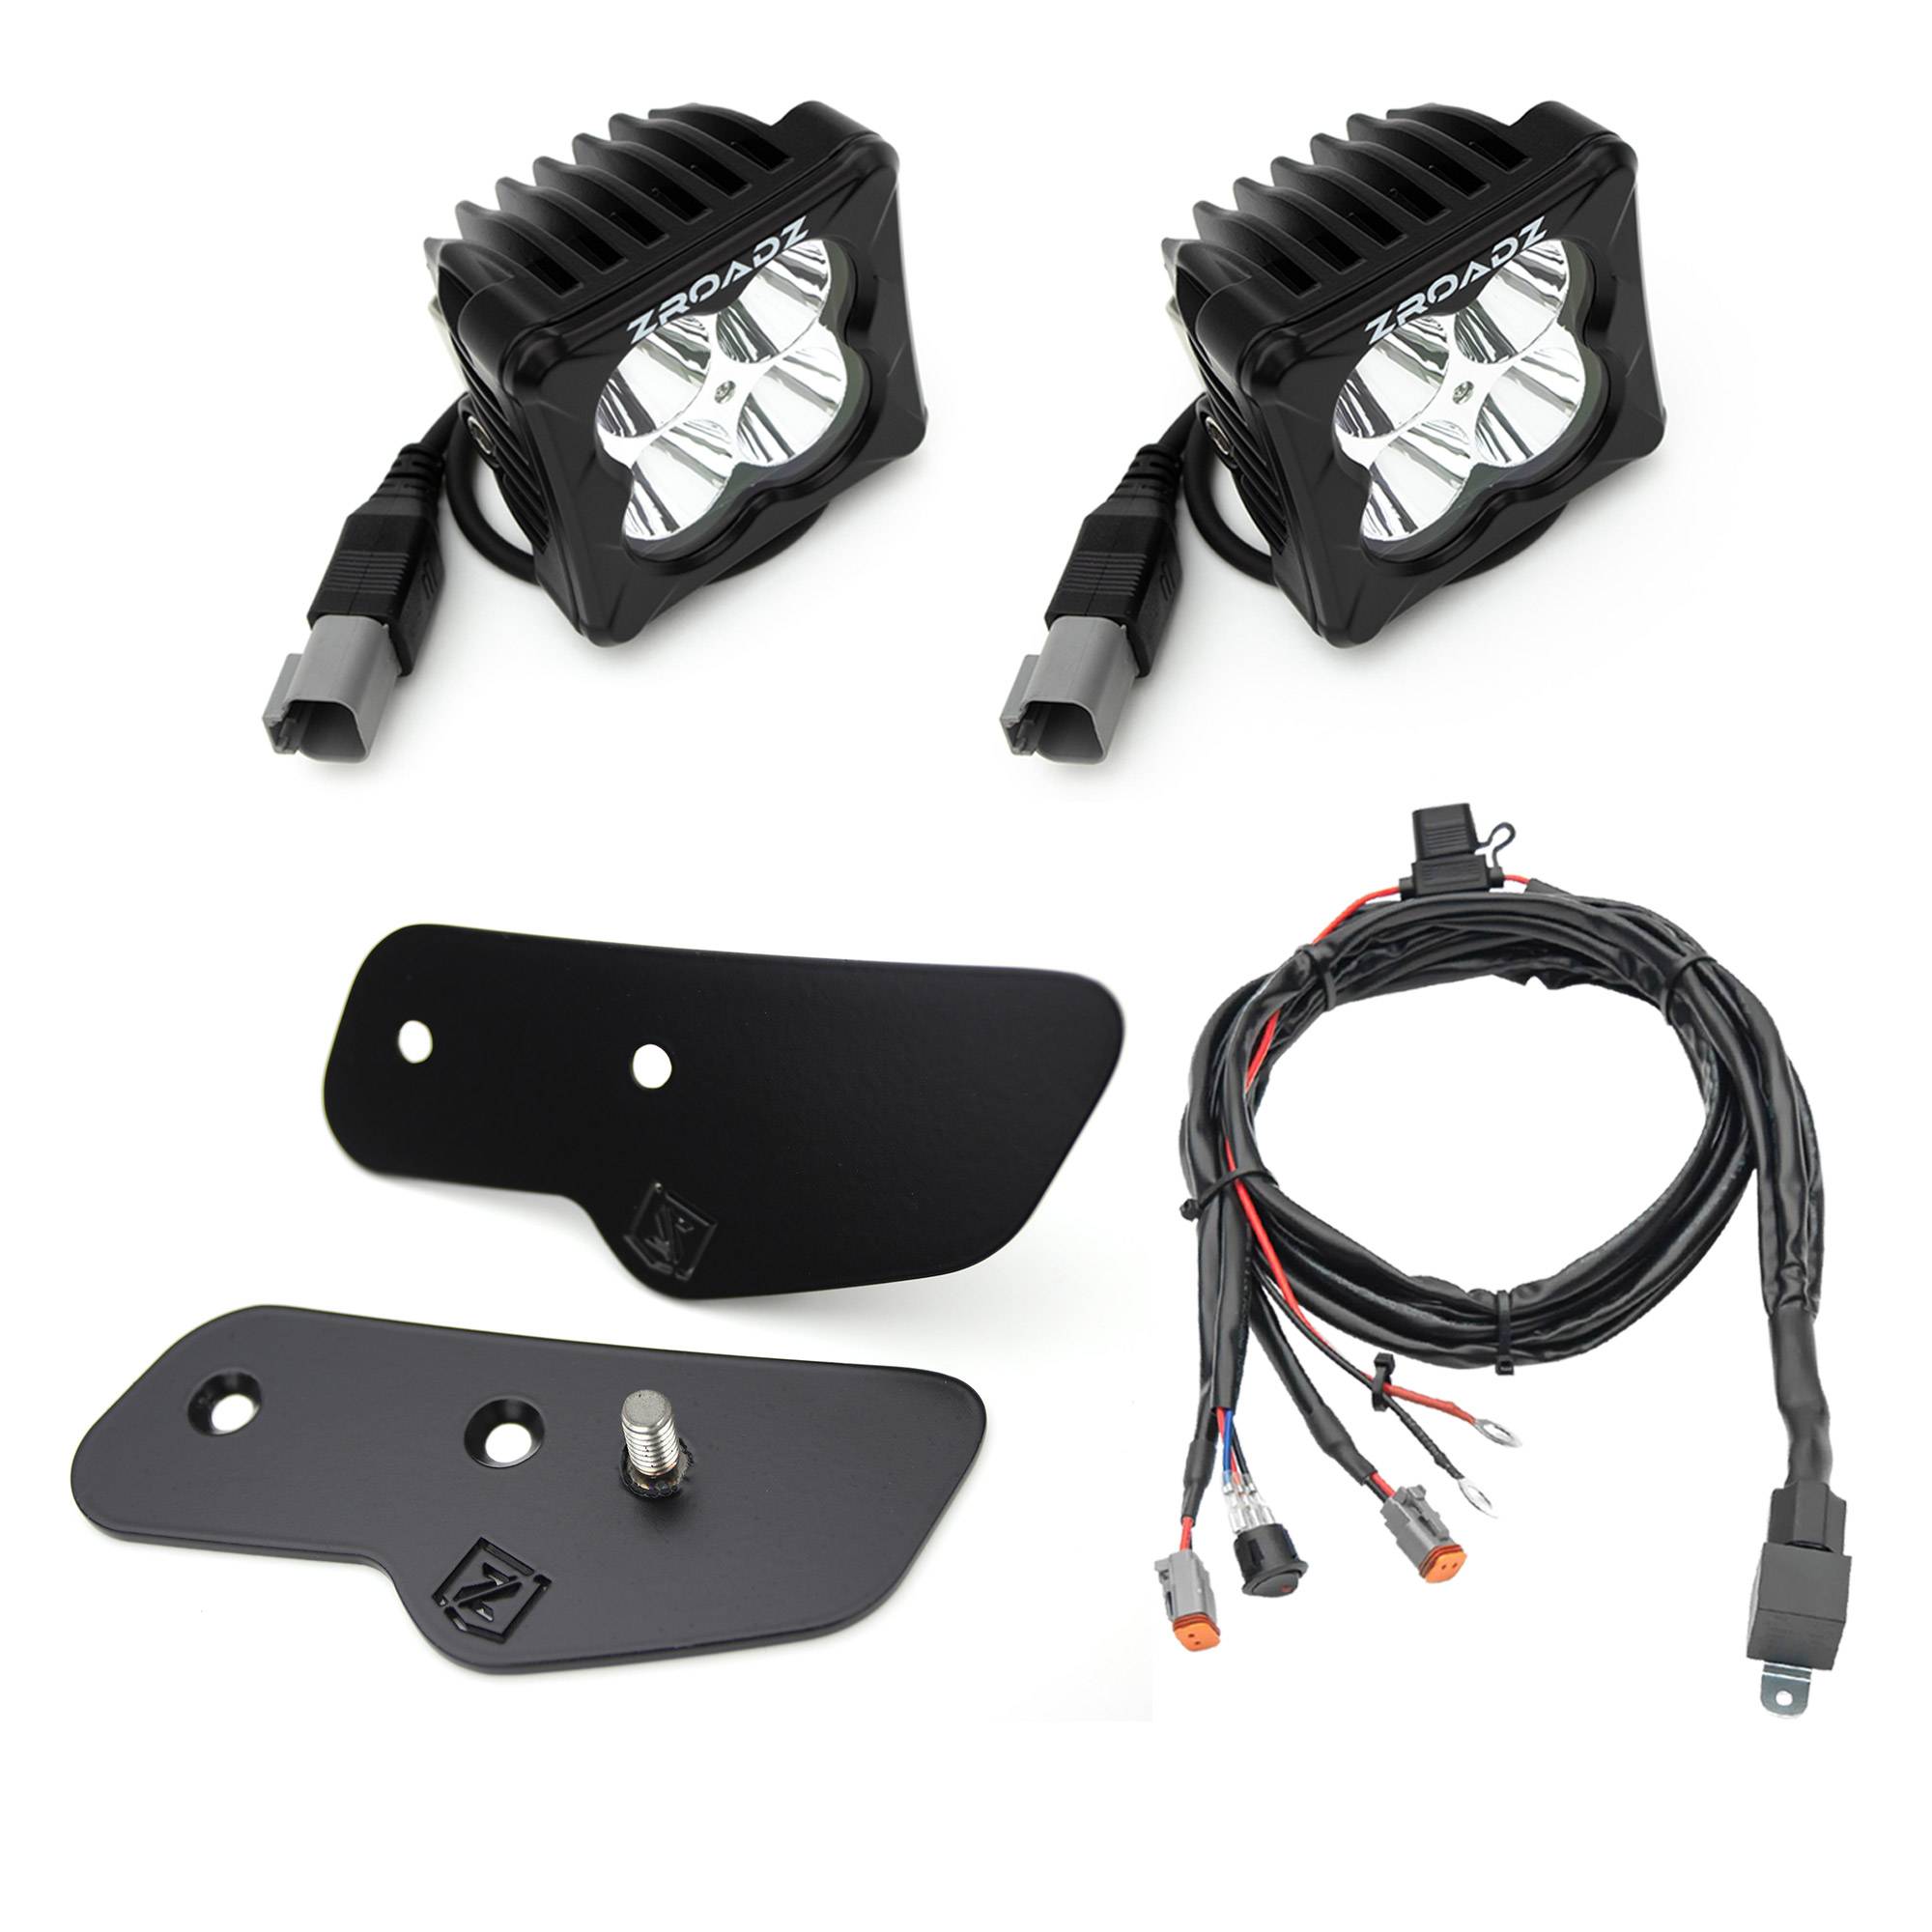 ZROADZ OFF ROAD PRODUCTS - 2021-2022 Ford Bronco Mirror/Ditch Light LED KIT, Includes (2) 3 inch ZROADZ White LED Pod Lights - Part # Z365401-KIT2